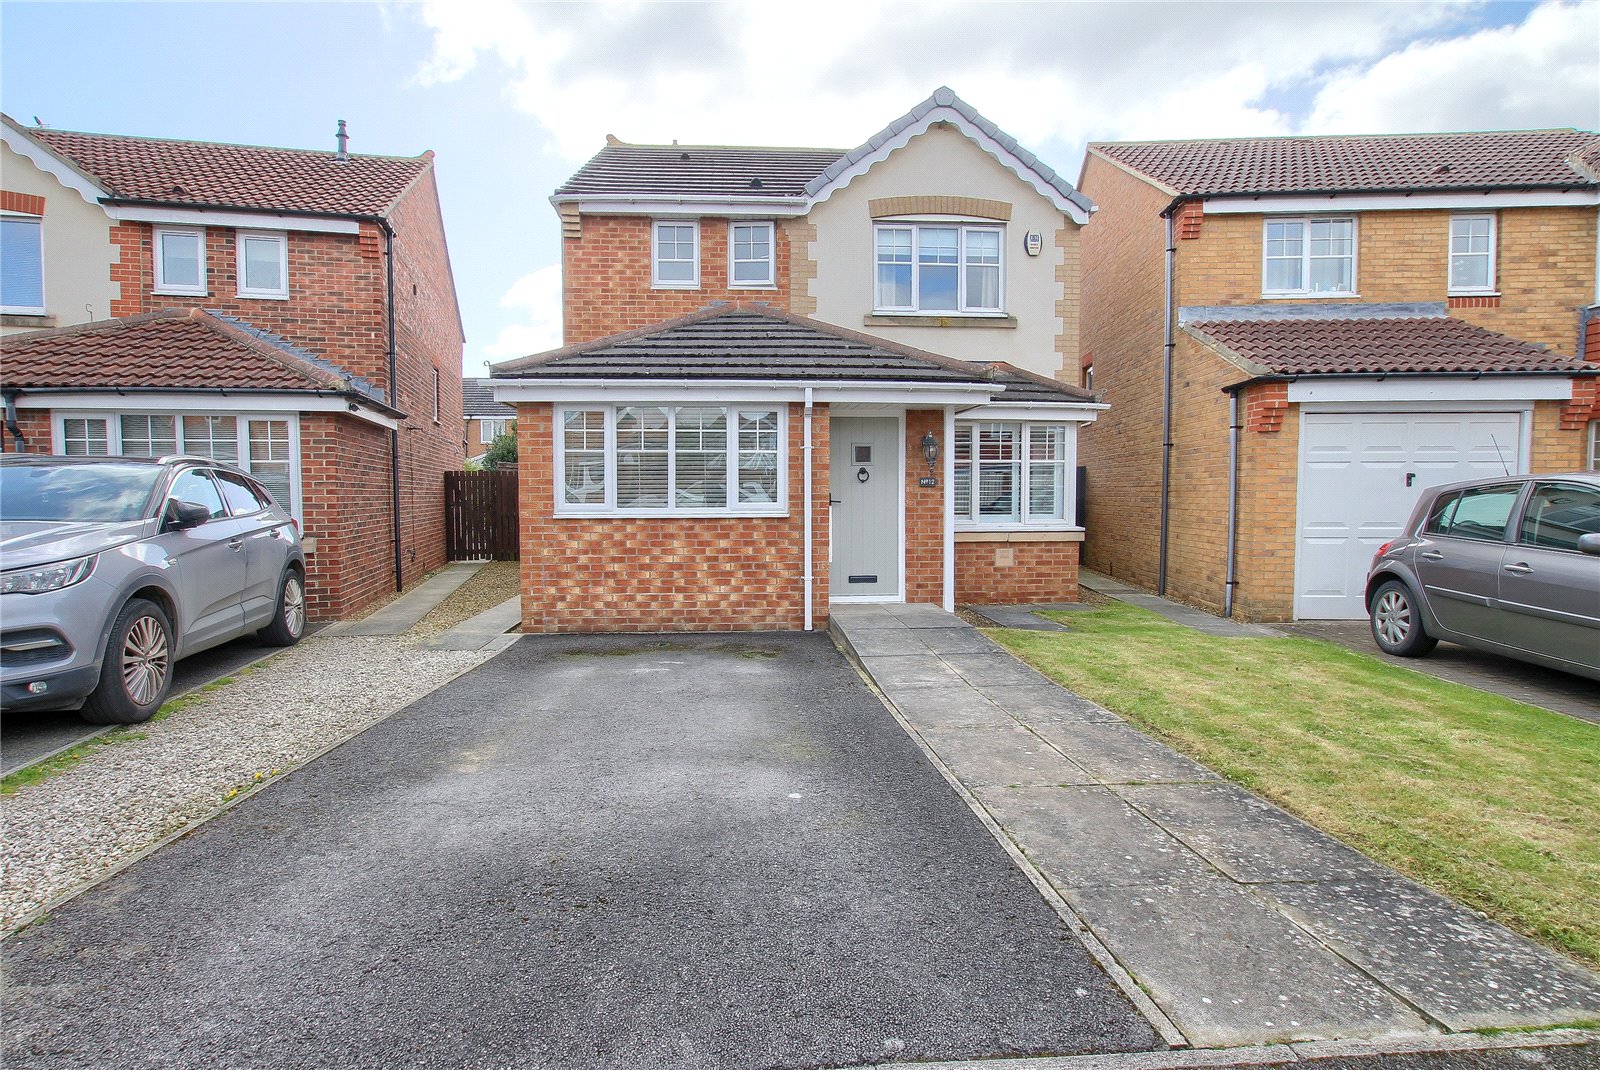 3 bed house for sale in Chaucer Close, Billingham  - Property Image 1